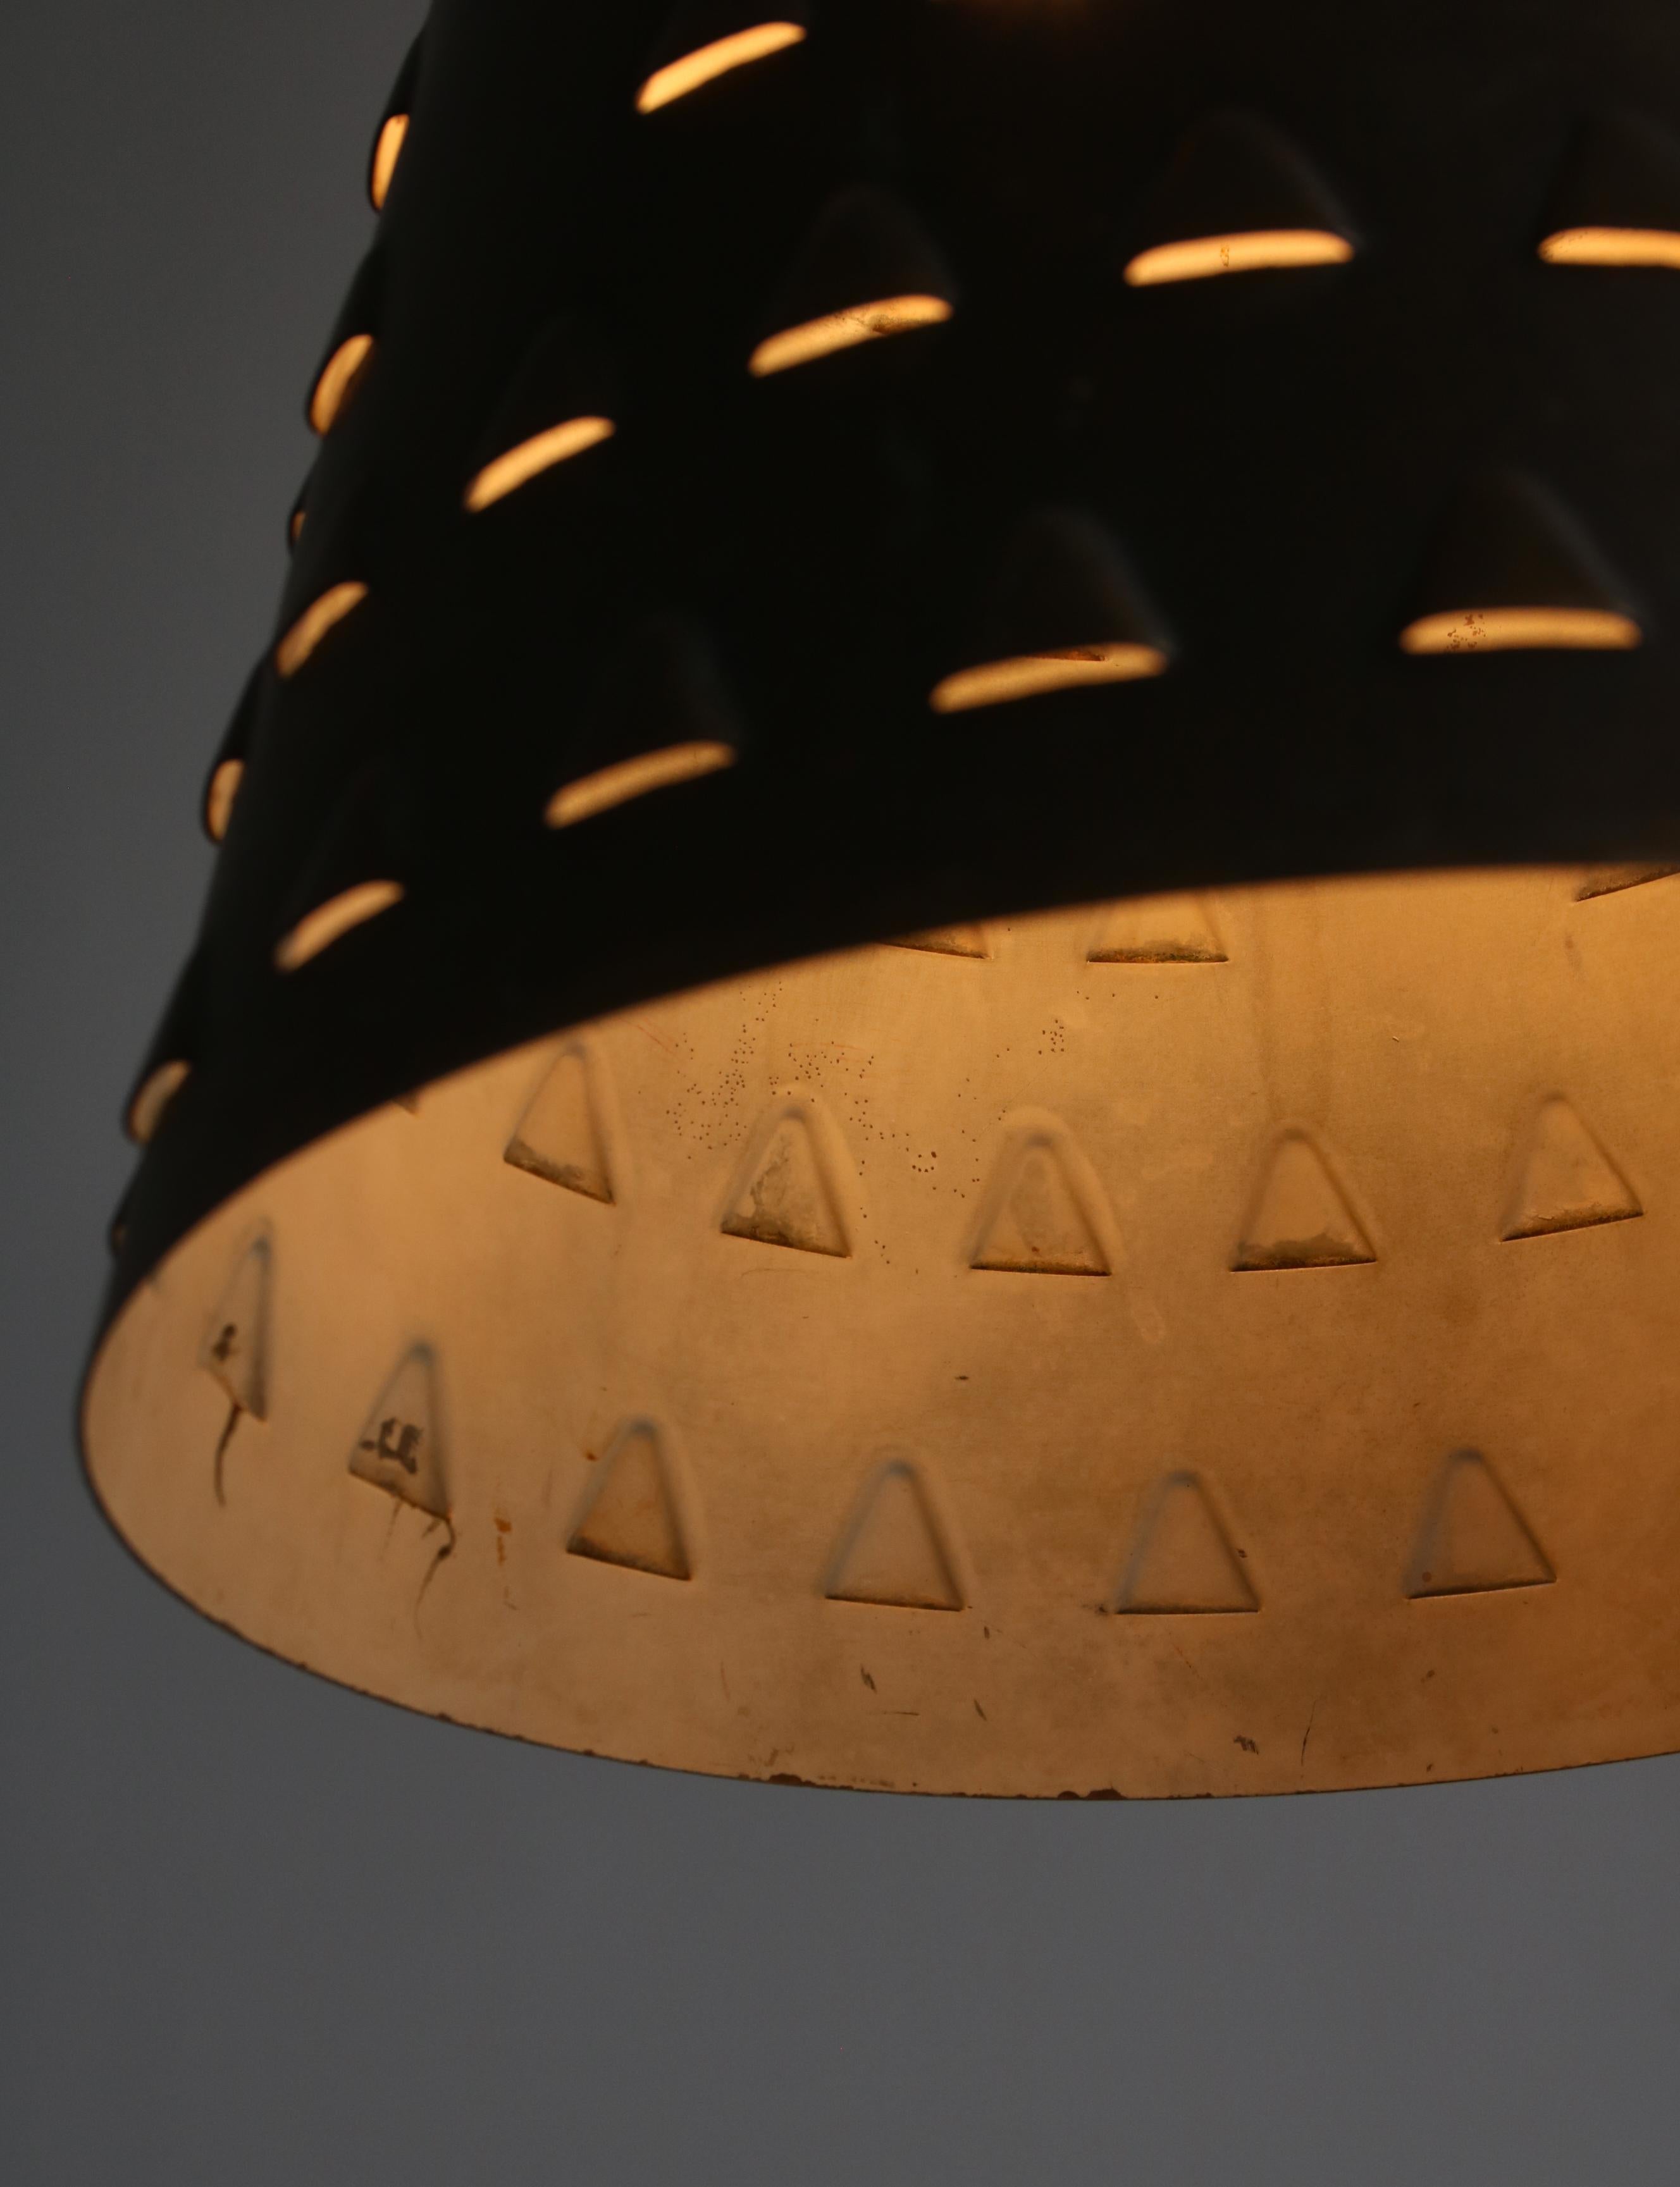 Large Pendants in Patinated Brass by Brockmann-Petersen, Danish Modern, 1953 For Sale 8